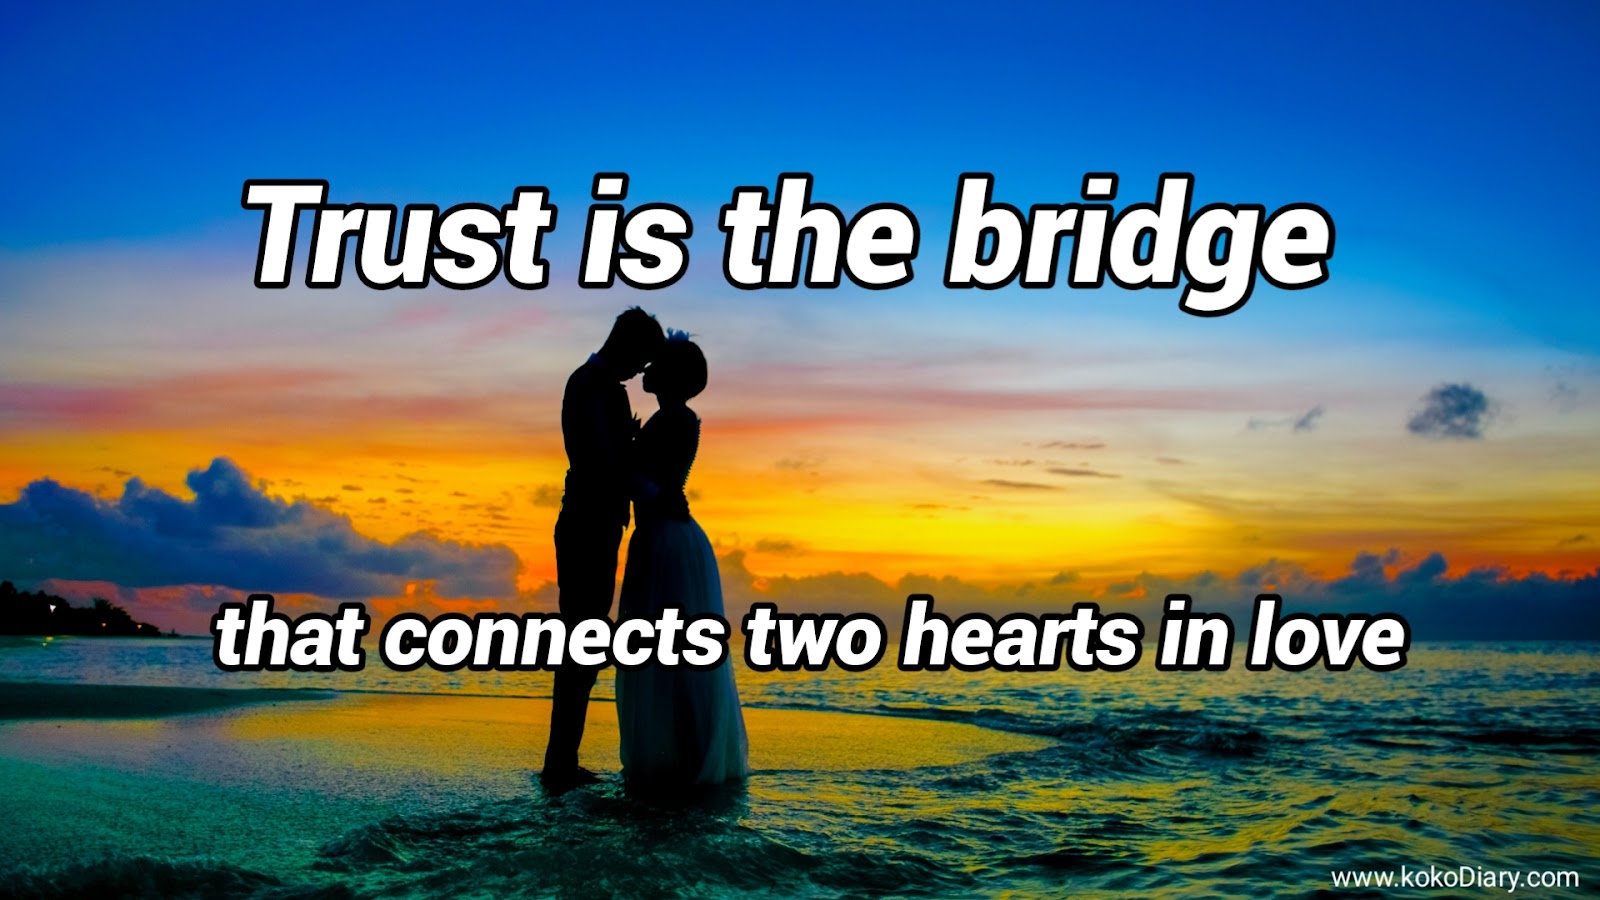 quotations on trust and love